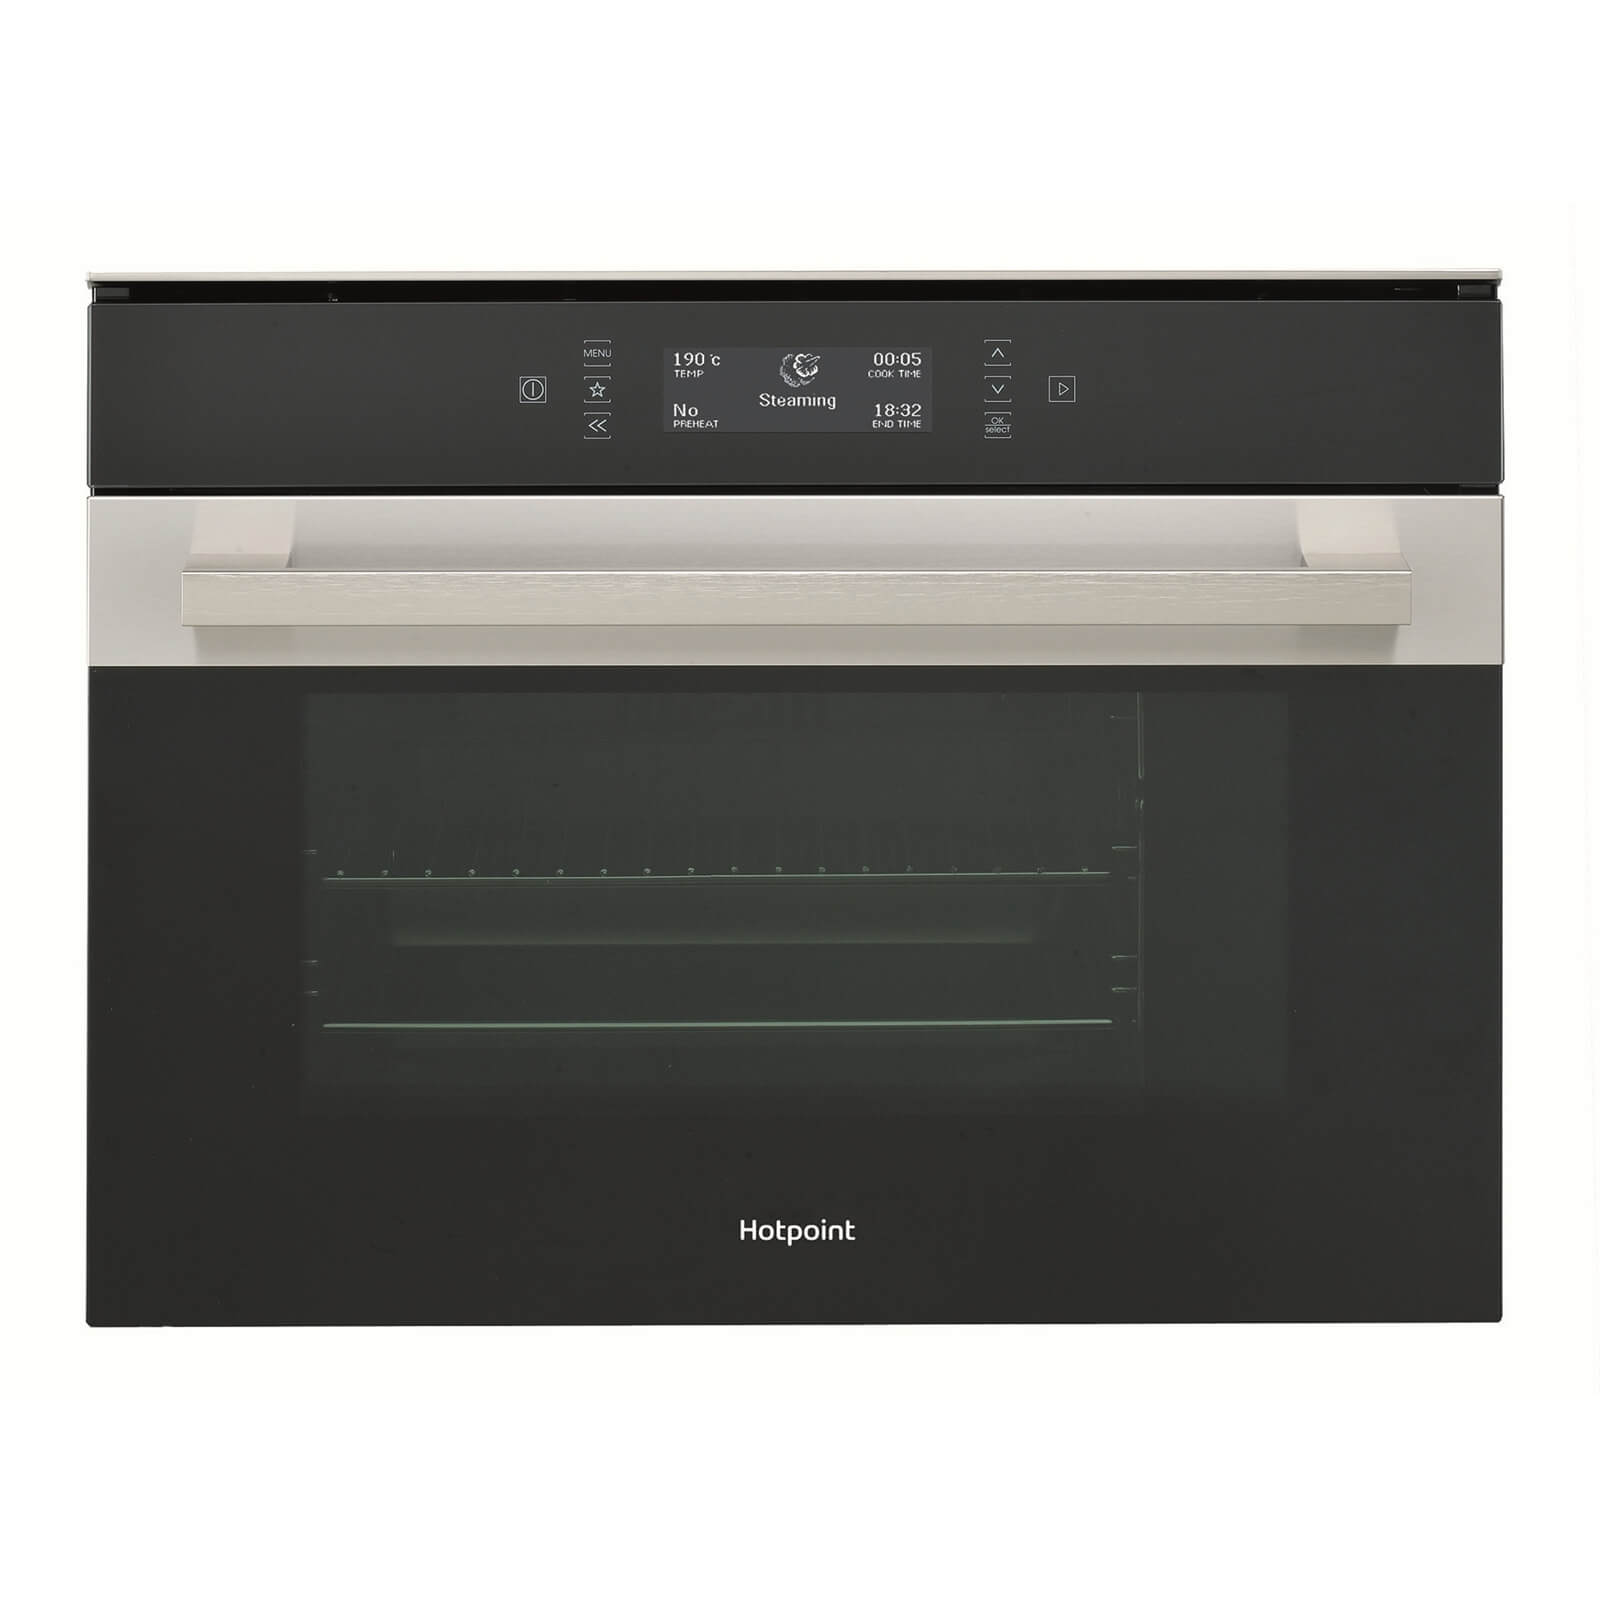 Hotpoint Class 9 MS 998 IX H Built-in Oven - Stainless Steel